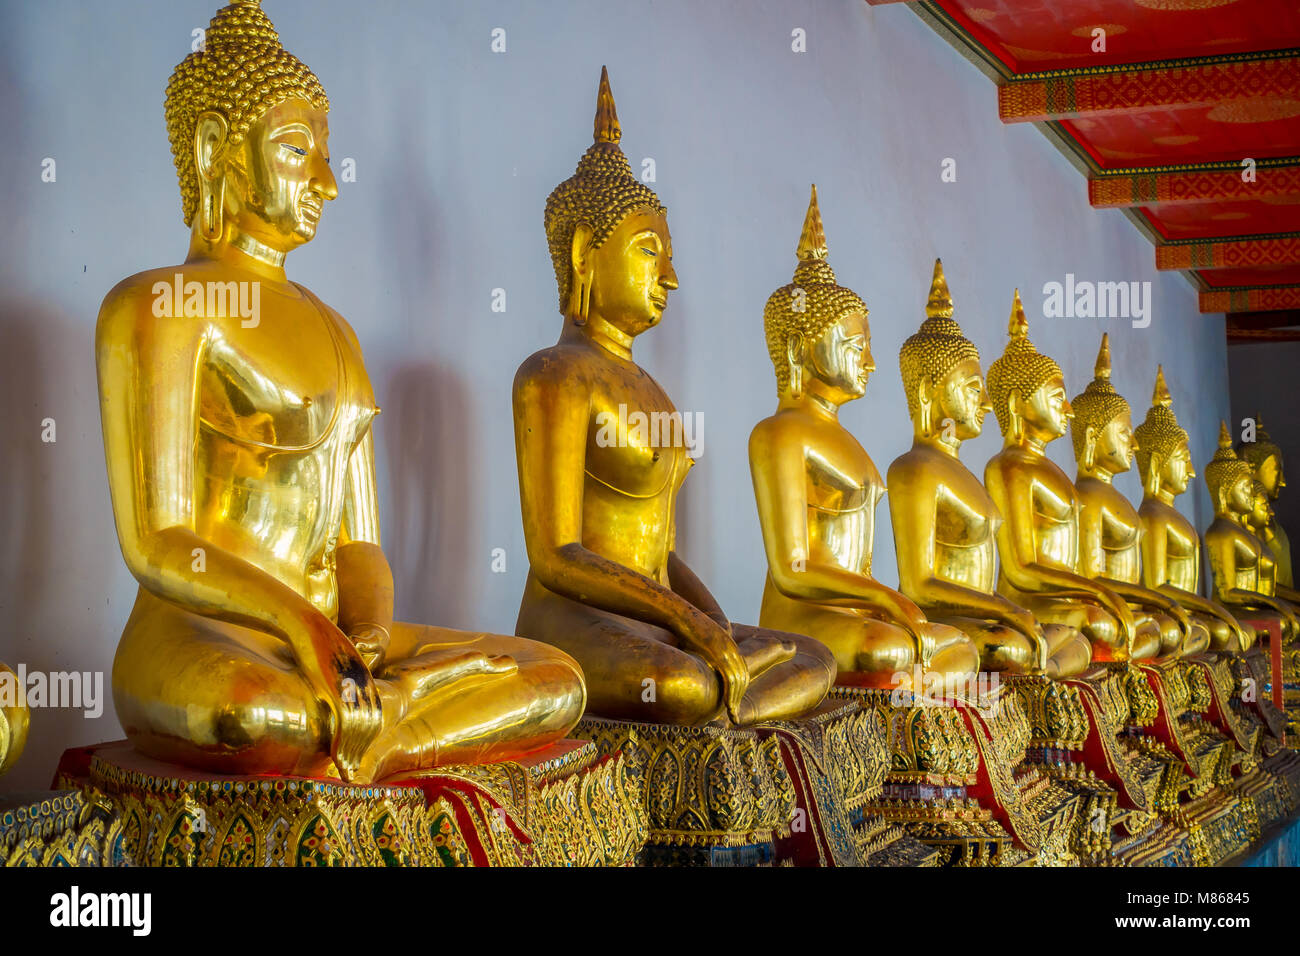 Indoor view of nice Gold Buddha Statues in a row in Wat Pho Temple in Thailand Stock Photo